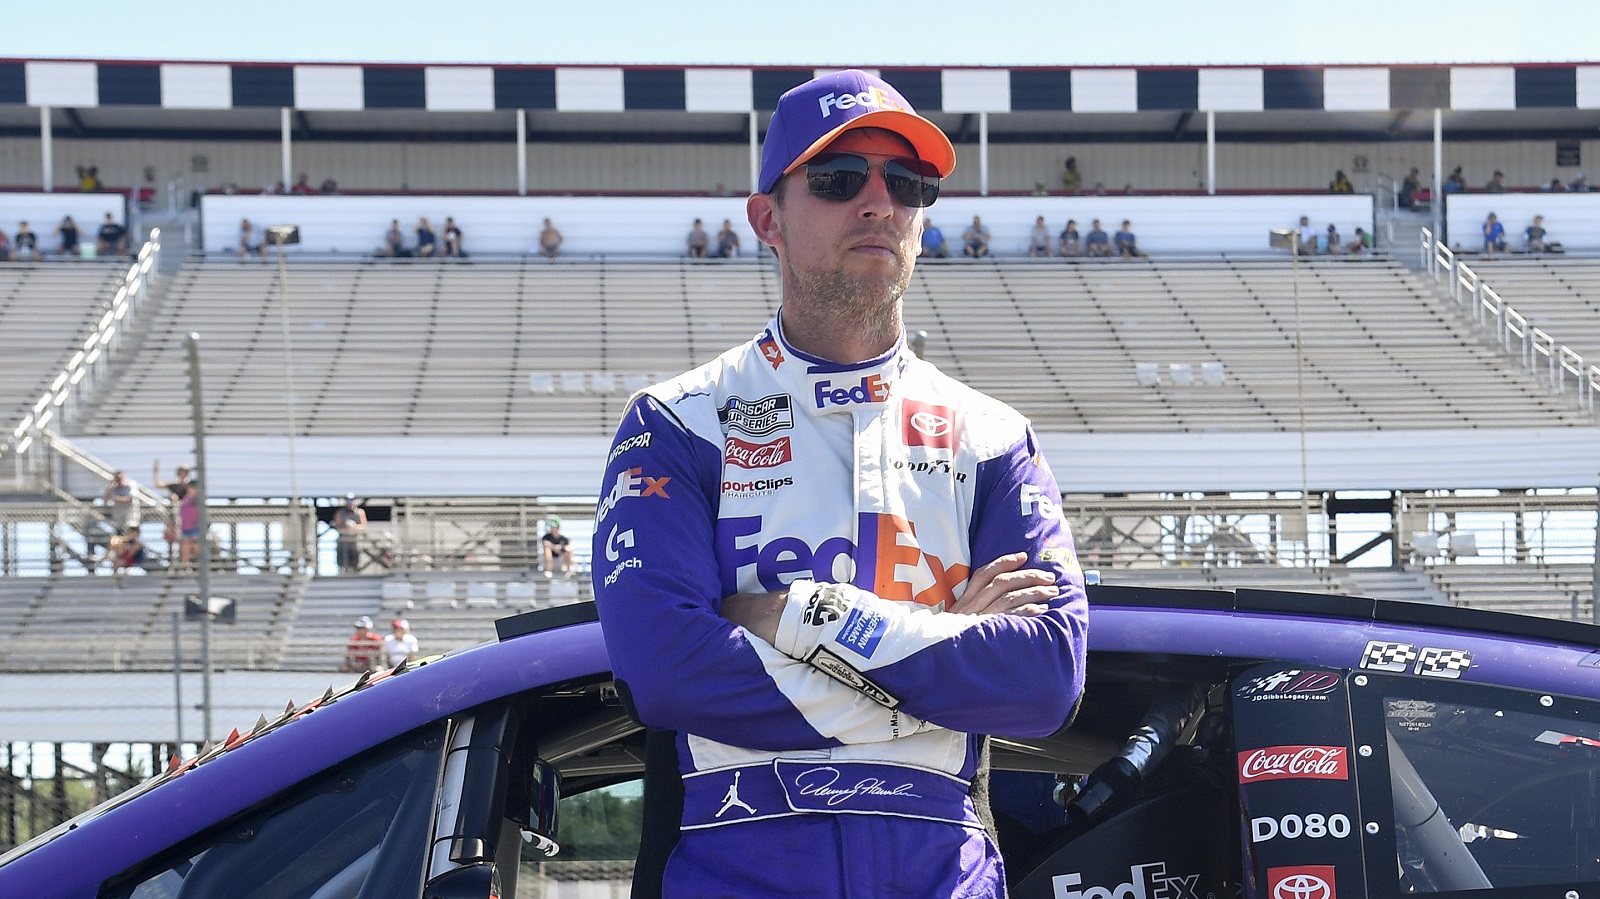 Denny Hamlin looks on during qualifying for the NASCAR Cup Series M&M's Fan Appreciation 400 at Pocono Raceway on July 23, 2022.